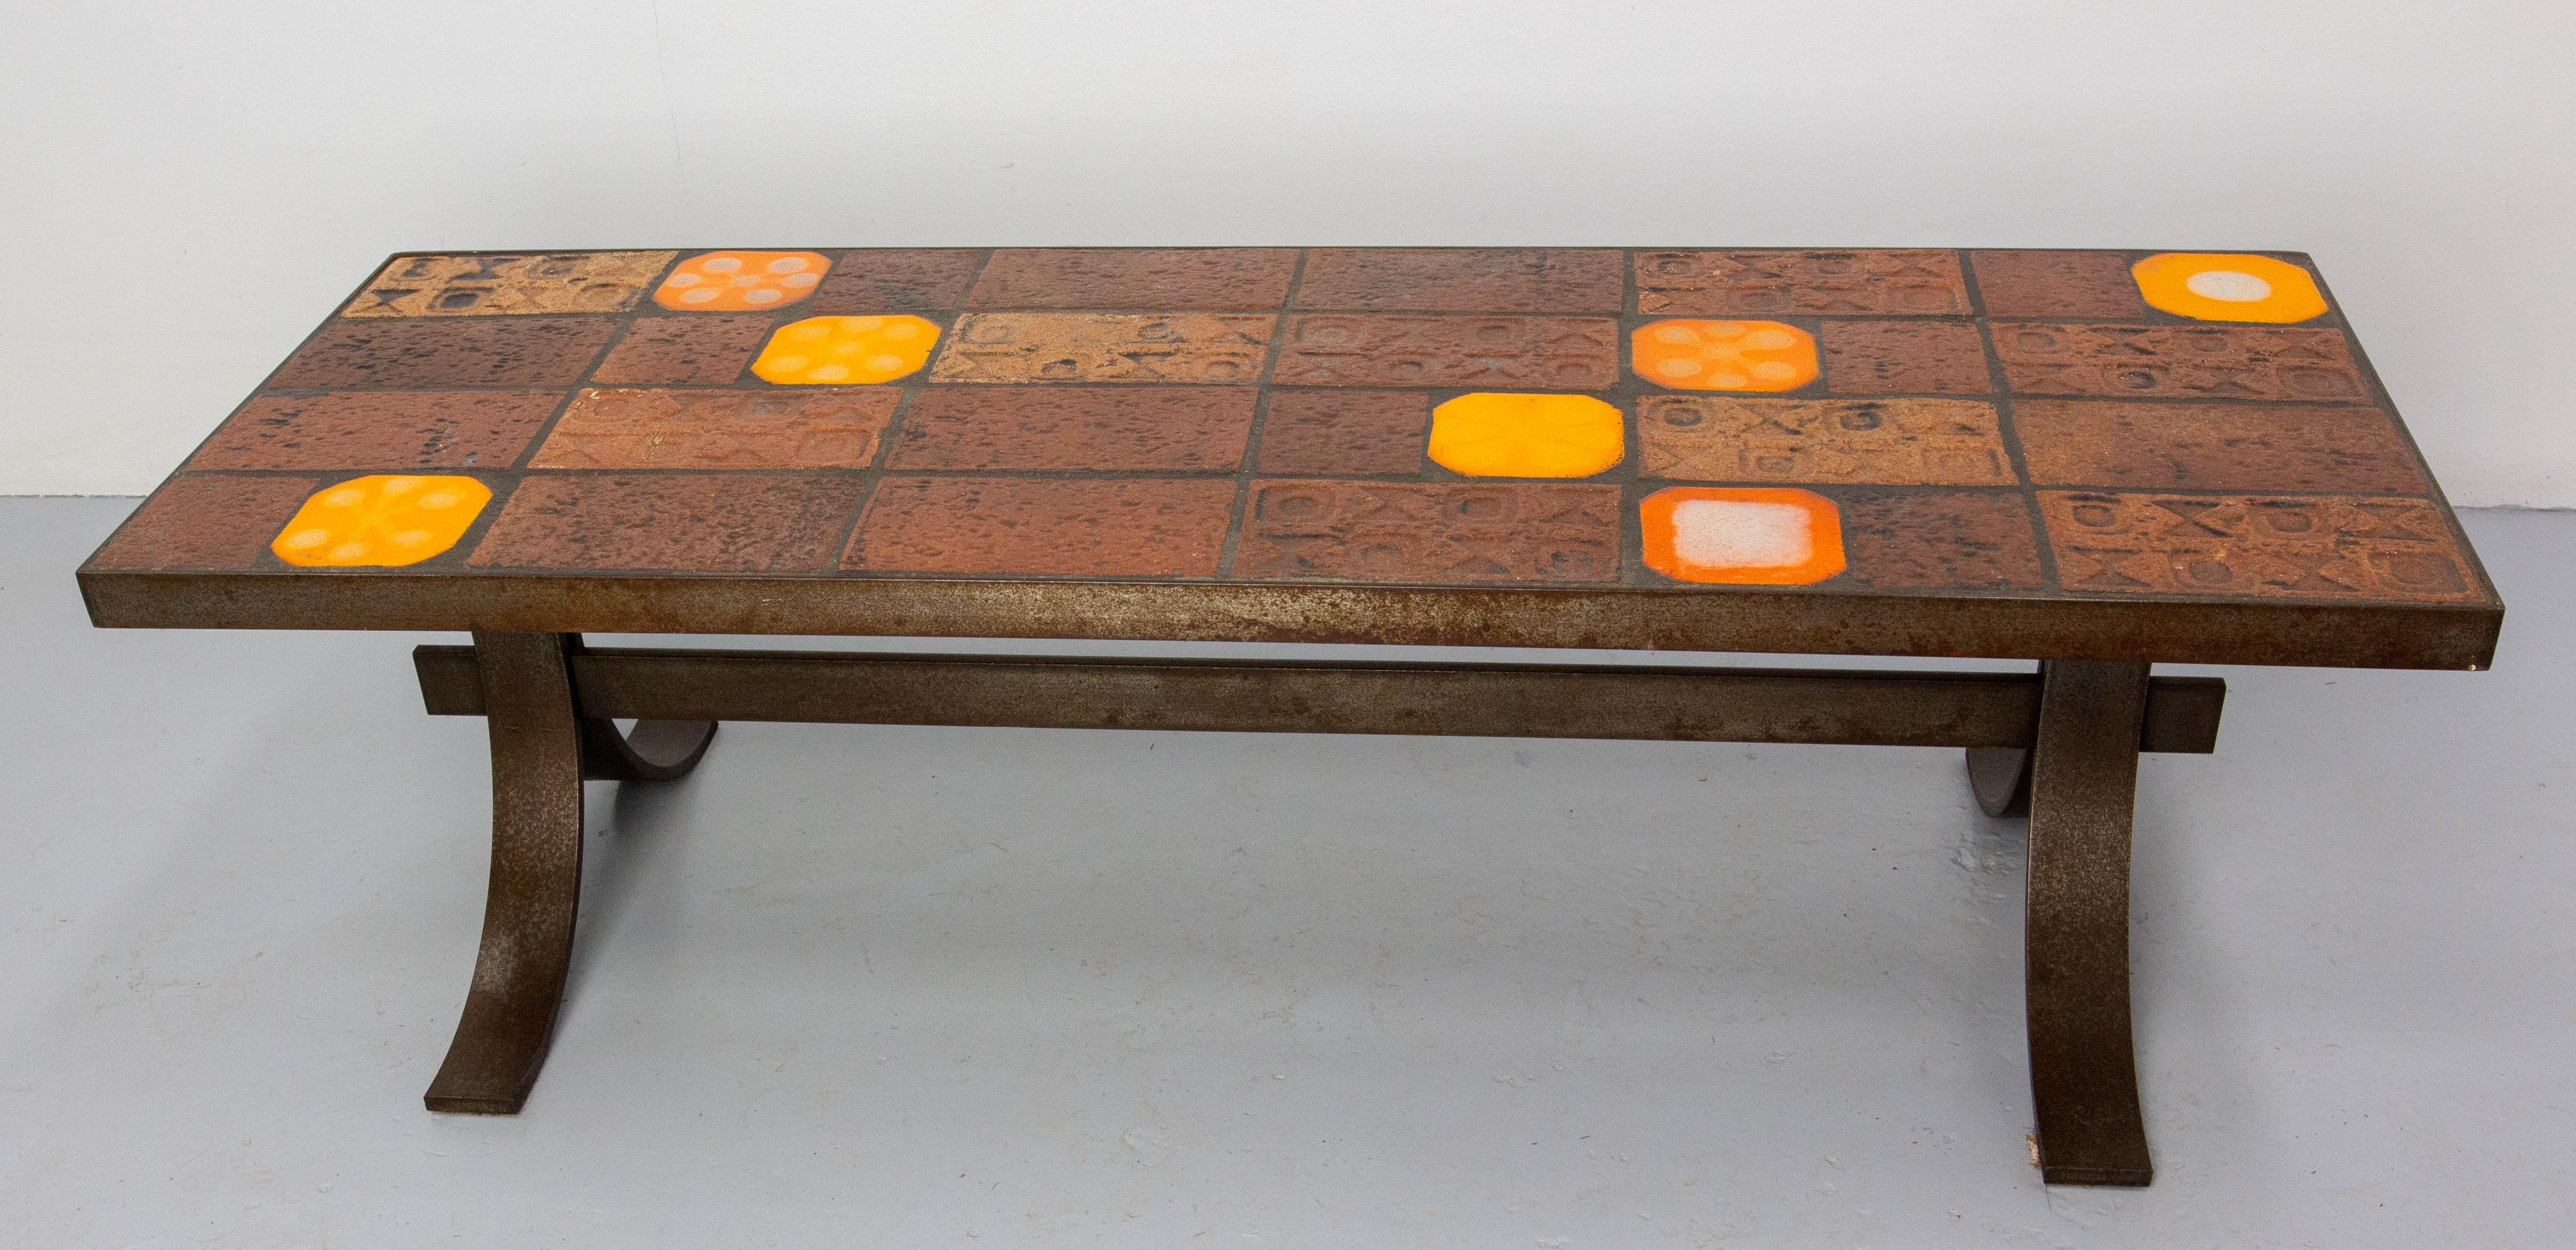 French Coffee Table with Glazed Ceramics in the st of Roger Capron, circa 1960 For Sale 1